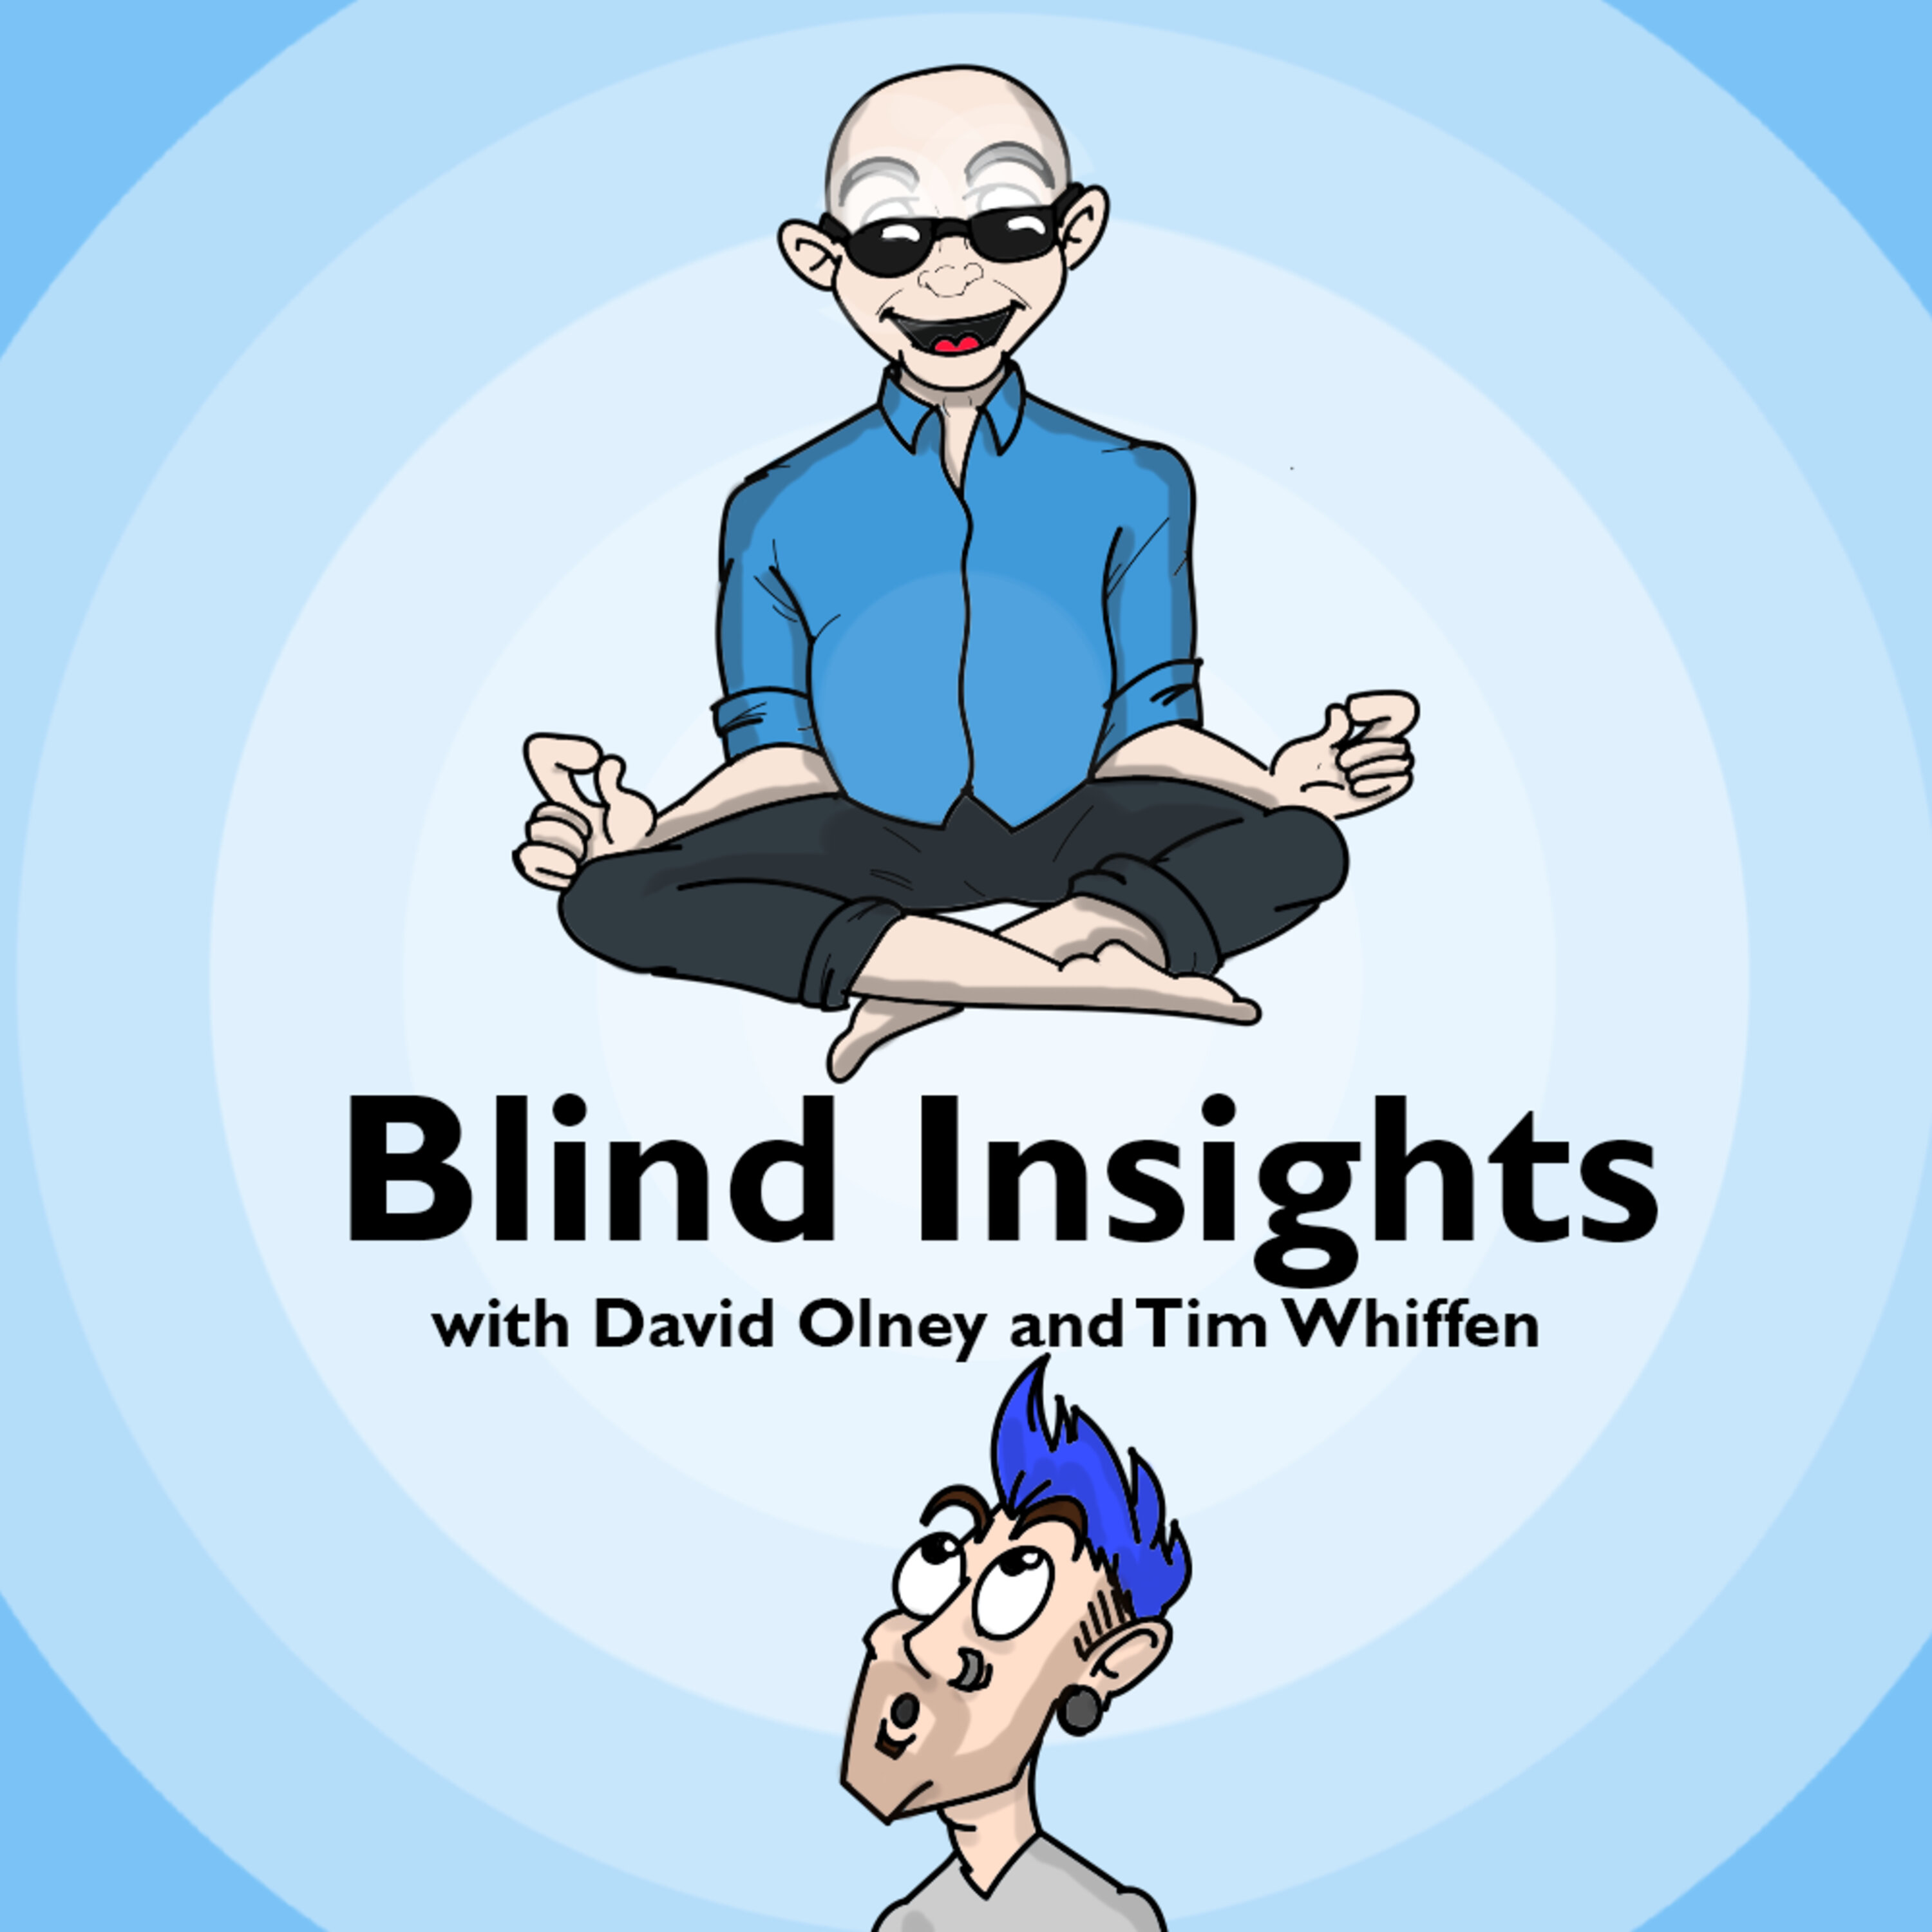 Blind Insights - Should All Life Matter Equally?